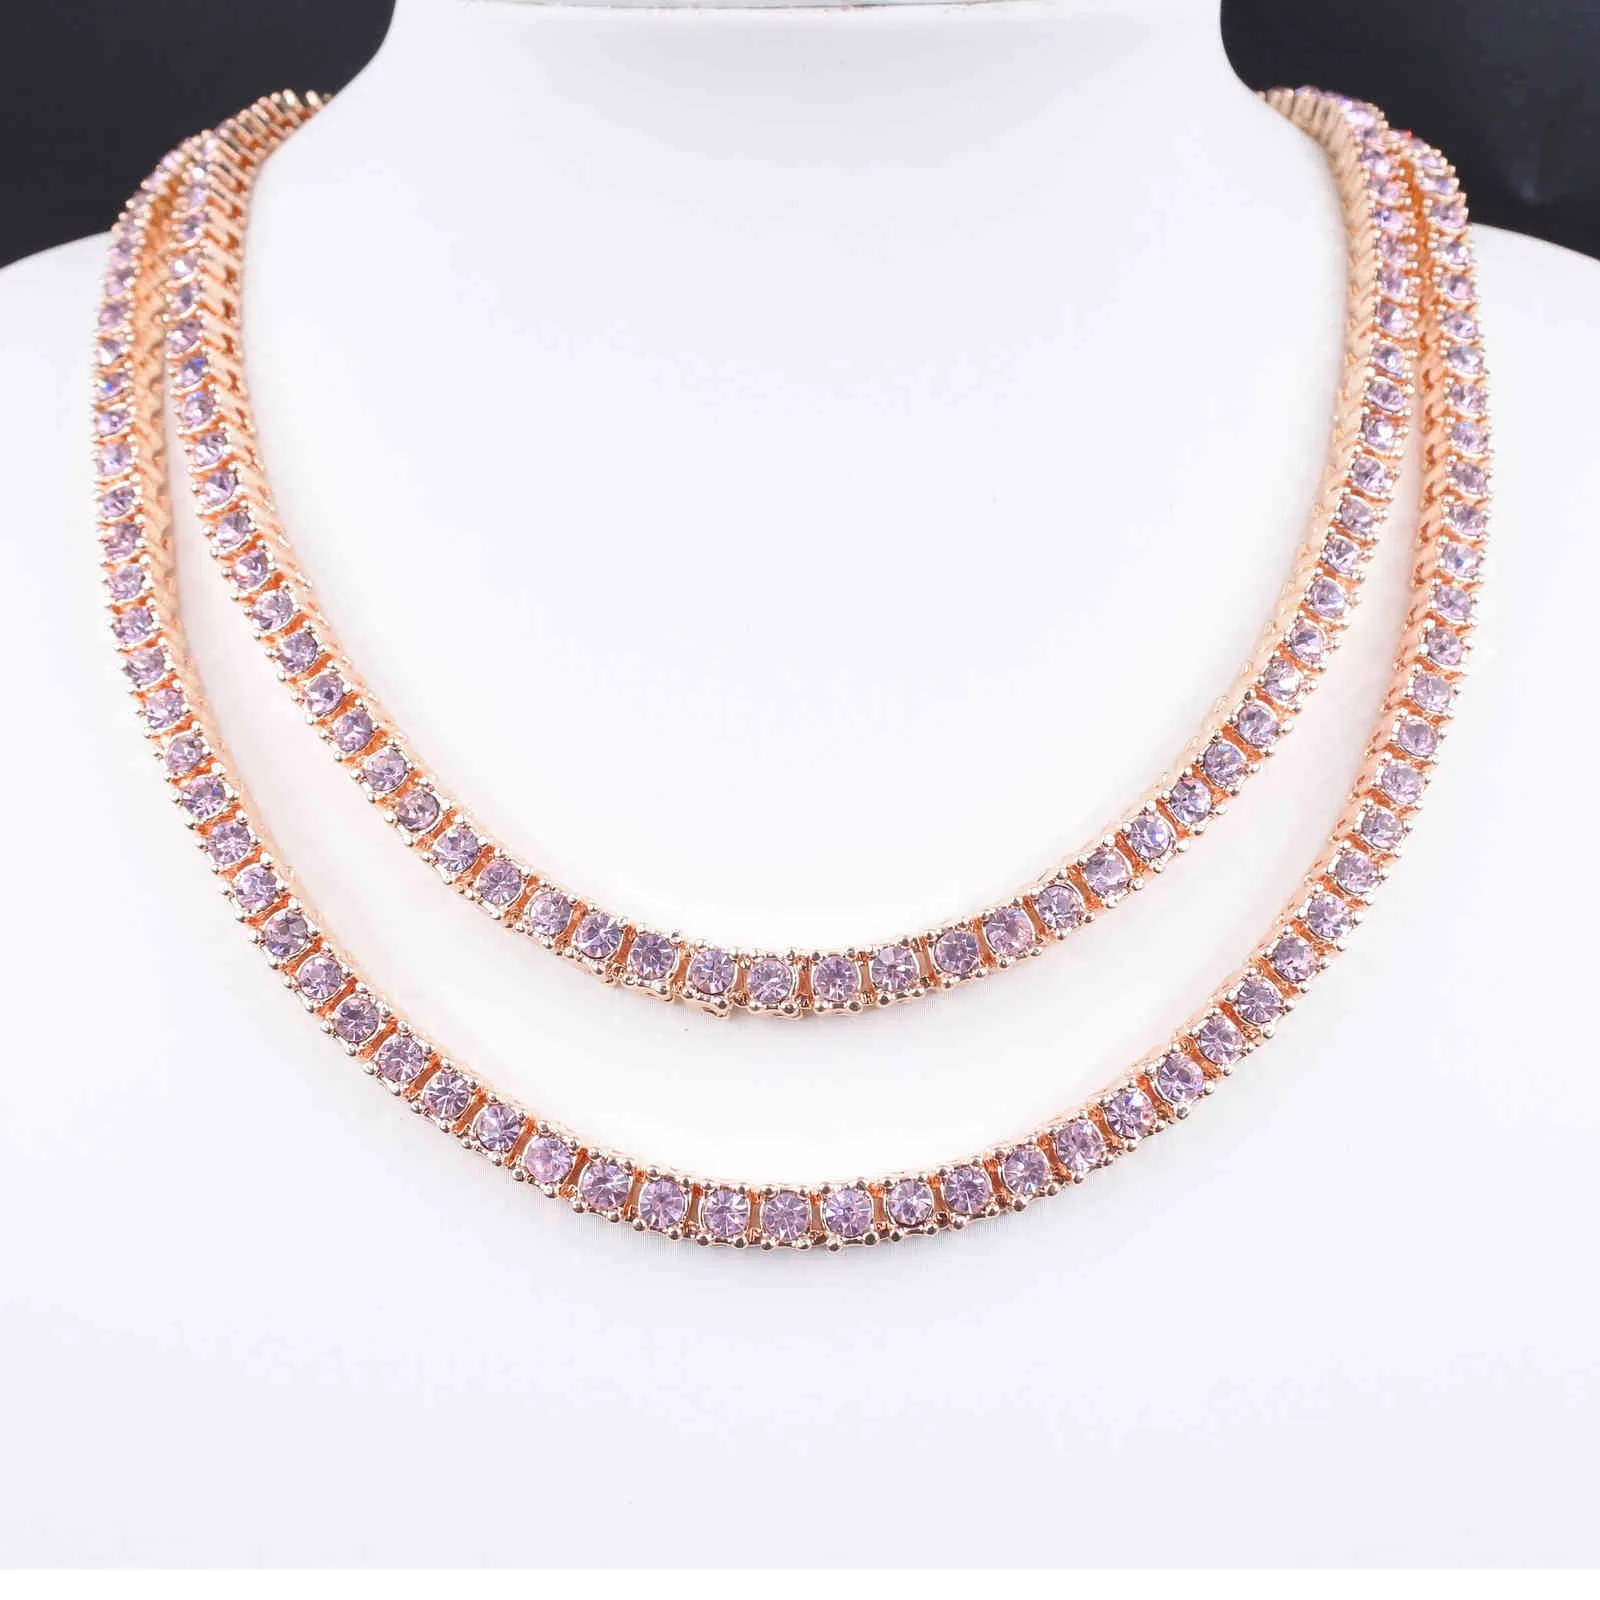 Rose Gold Pink Crystal 1 Row Tennis Chain Hip Hop Kvinnors Halsband Mäns Punk Rapper Sångare's Iced Out Bling CZ Fashion Smycken